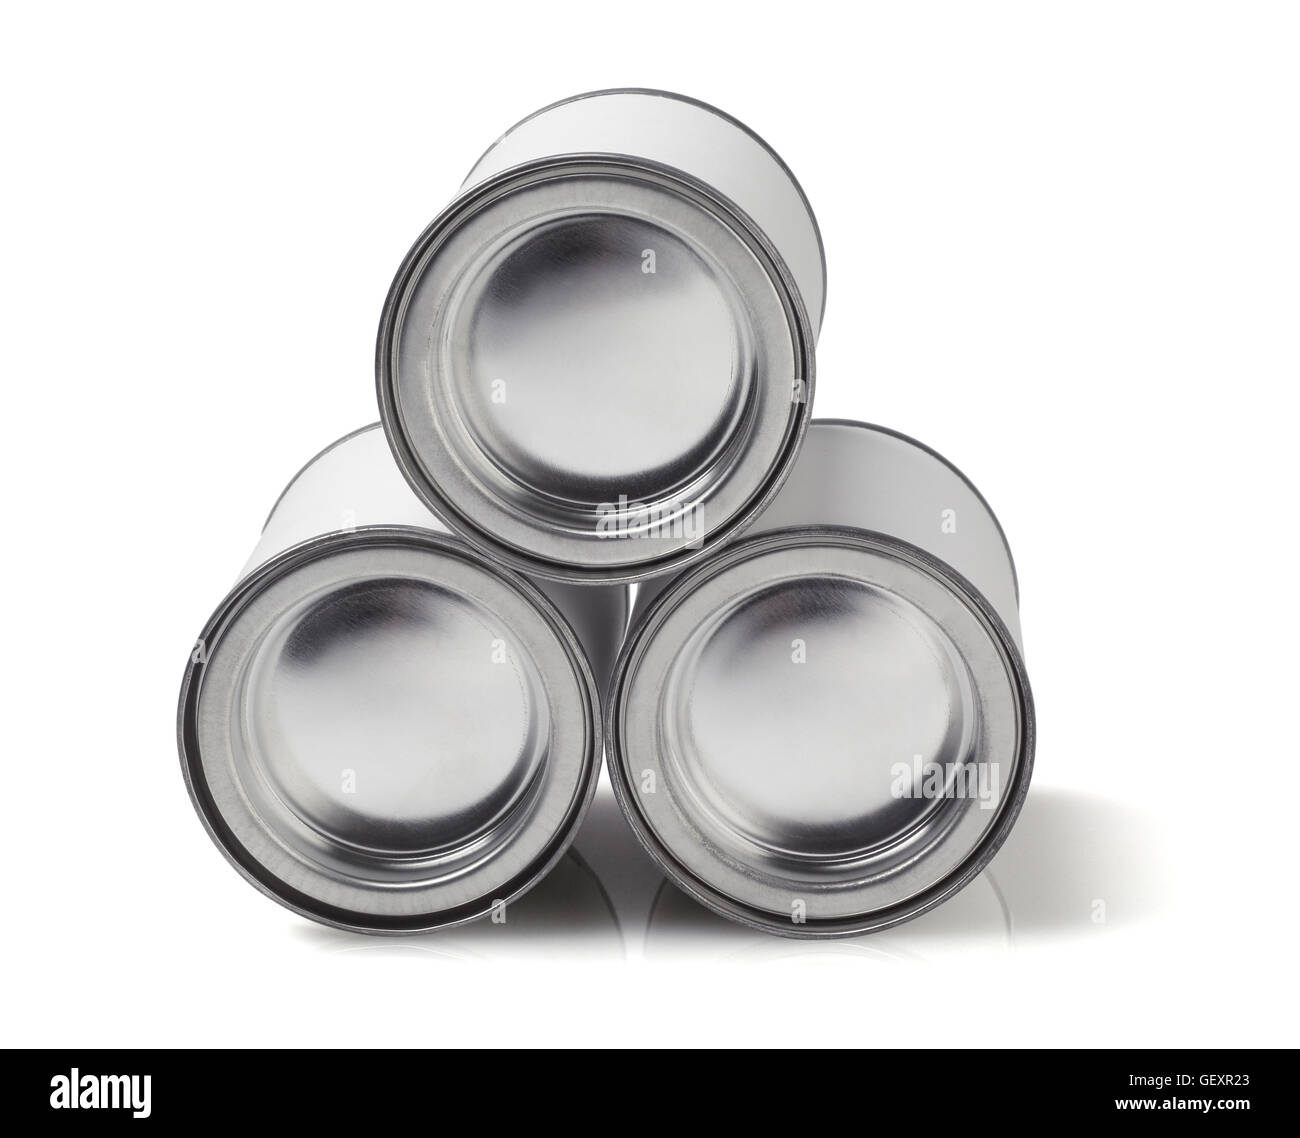 Stack of Tin Cans Lying on White Background Stock Photo